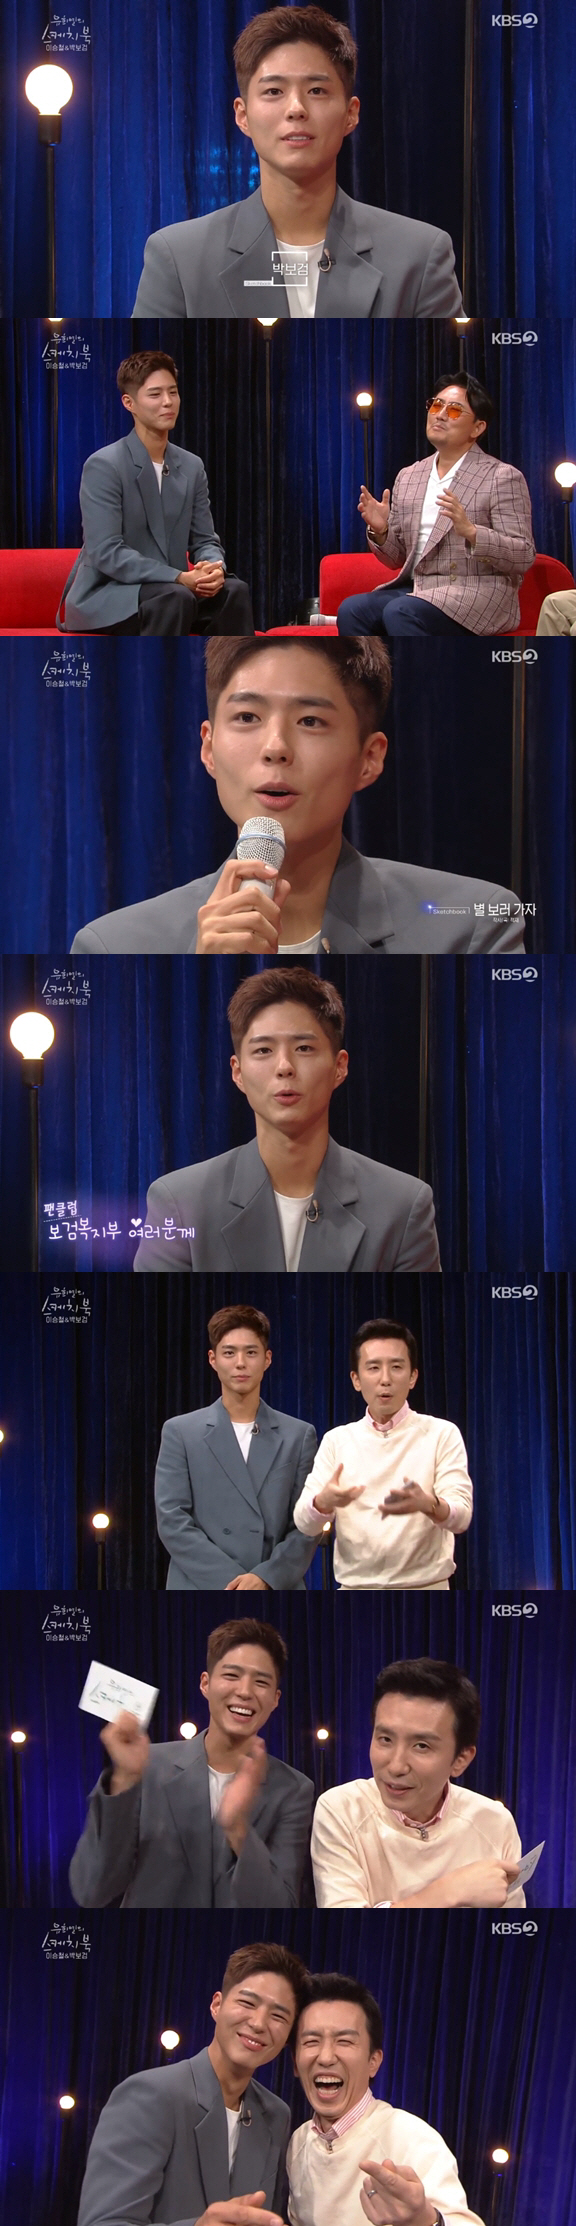 You Hee-yeols Sketchbook Park Bo-gum gave a special stage from piano to song.Actor Park Bo-gum appeared on KBS 2TV You Hee-yeols Sketchbook broadcast on the 20th.Lee Seung-cheol and Park Bo-gum, who have been linked to the singer and music video protagonist in the webtoon Moonlight Sculptor OST I Love You Much released in January this year, prepared a special stage that can only be seen in You Hee-yeols Sketchbook.Park Bo-gum took on the piano accompaniment of I love you a lot and presented a perfect breath with Lee Seung-cheol and presented the river and the river.MC You Hee-yeol said, I was surprised to hit so perfectly.At the end, I was slightly wrong and smiled, and my heart rattled. You Hee-yeol then asked for another song, saying, I did not know that I was playing the piano so well. Park Bo-gum played Lee Seung-cheols West Sky and Toys Good Man and sang songs directly.He also played Chopstick March with You Hee-yeol and completed a sweet harmony.You Hee-yeols Sketchbook is a favorite Friday night, Park Bo-gum said, Your smile You Hee-yeol tickled my heart.I did not forget it, he said, making MC You Hee-yeol happy.Lee Seung-cheol, who first met Park Bo-gum on the day, praised Its hard to play with the band, but it was really good.Park Bo-gum said, Lee Seung-cheol has made this stage offer, and it is an honorable opportunity for me.But I was nervous and I fell asleep yesterday. I usually liked and admired Lee Seung-cheol, and I have never participated in a music video since my debut, but I was given the opportunity and I was honored and appeared.Park Bo-gum has also revealed his dream of becoming a singer: he dreamed of being a singer-songwriter before he made his debut as an actor, and he became an actor on the suggestion of his agency representative.But Park Bo-gum was still not dreaming of becoming a singer, going to graduate school as a new media music department and releasing Christmas albums last winter.In addition, Park Bo-gum remade the Lets go to the stars of the loading last year and was attracting attention with pure tone.Lee Seung-cheol, who watched this, praised I like the pure voice; I pick these people during the audition.Park Bo-gum confessed, We are currently preparing for the project with the spring of antenna music. He made me look forward to the musician Park Bo-gum.Finally, he told the fan club Bogeum Welfare Department, Thank you for always supporting me. He expressed his affection and said, I hope you will love You Hee-yeols Sketchbook on Friday night.Park Bo-gum was surprised by the surprise transformation into You Hee-yeols Sketchbook MC according to You Hee-yeols proposal to reminisce about the memories of Music Bank in the past and try 2MC.The two introduced the next stage, Lee Seung-cheols Nobody else like that, which made everyone laugh with perfect sums from visuals to comments.